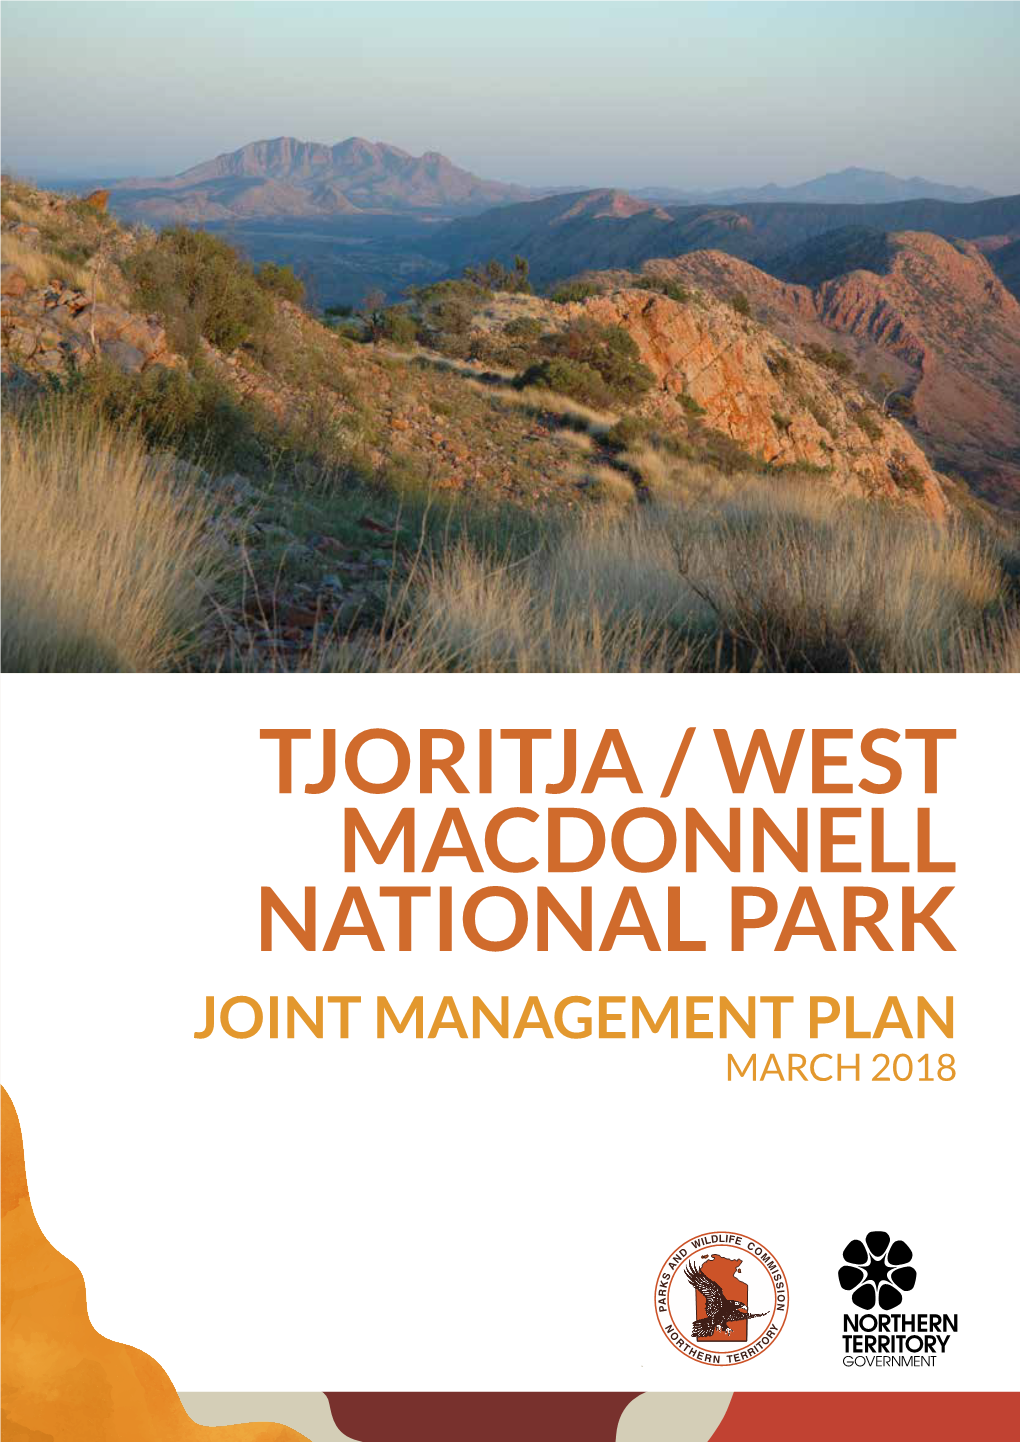 Tjoritja / West Macdonnell National Park Joint Management Plan March 2018 Working Together to Look After Culture and Country